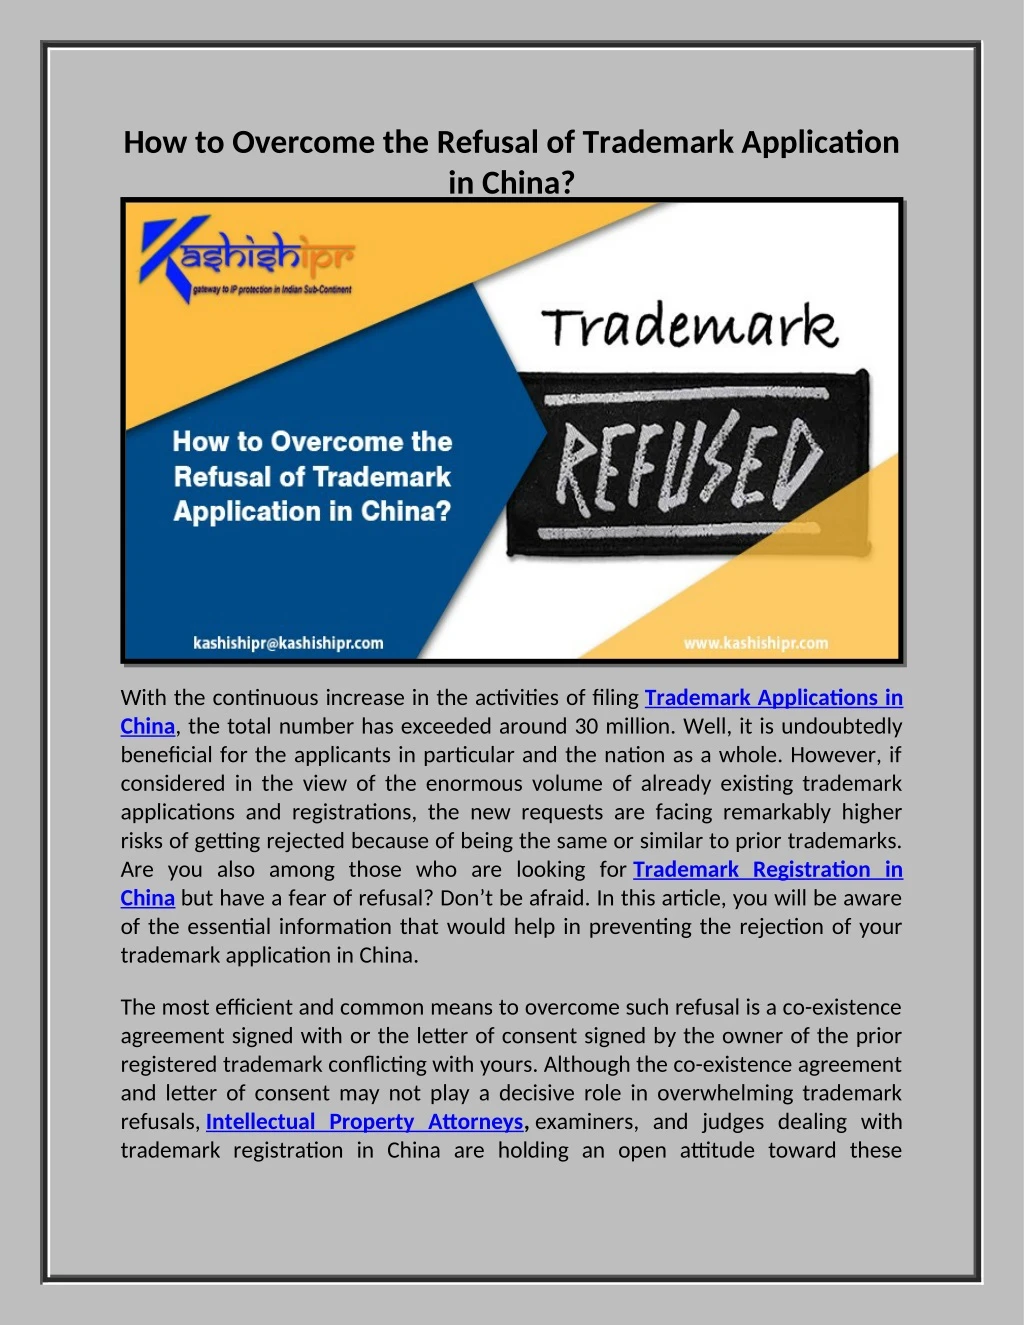 how to overcome the refusal of trademark